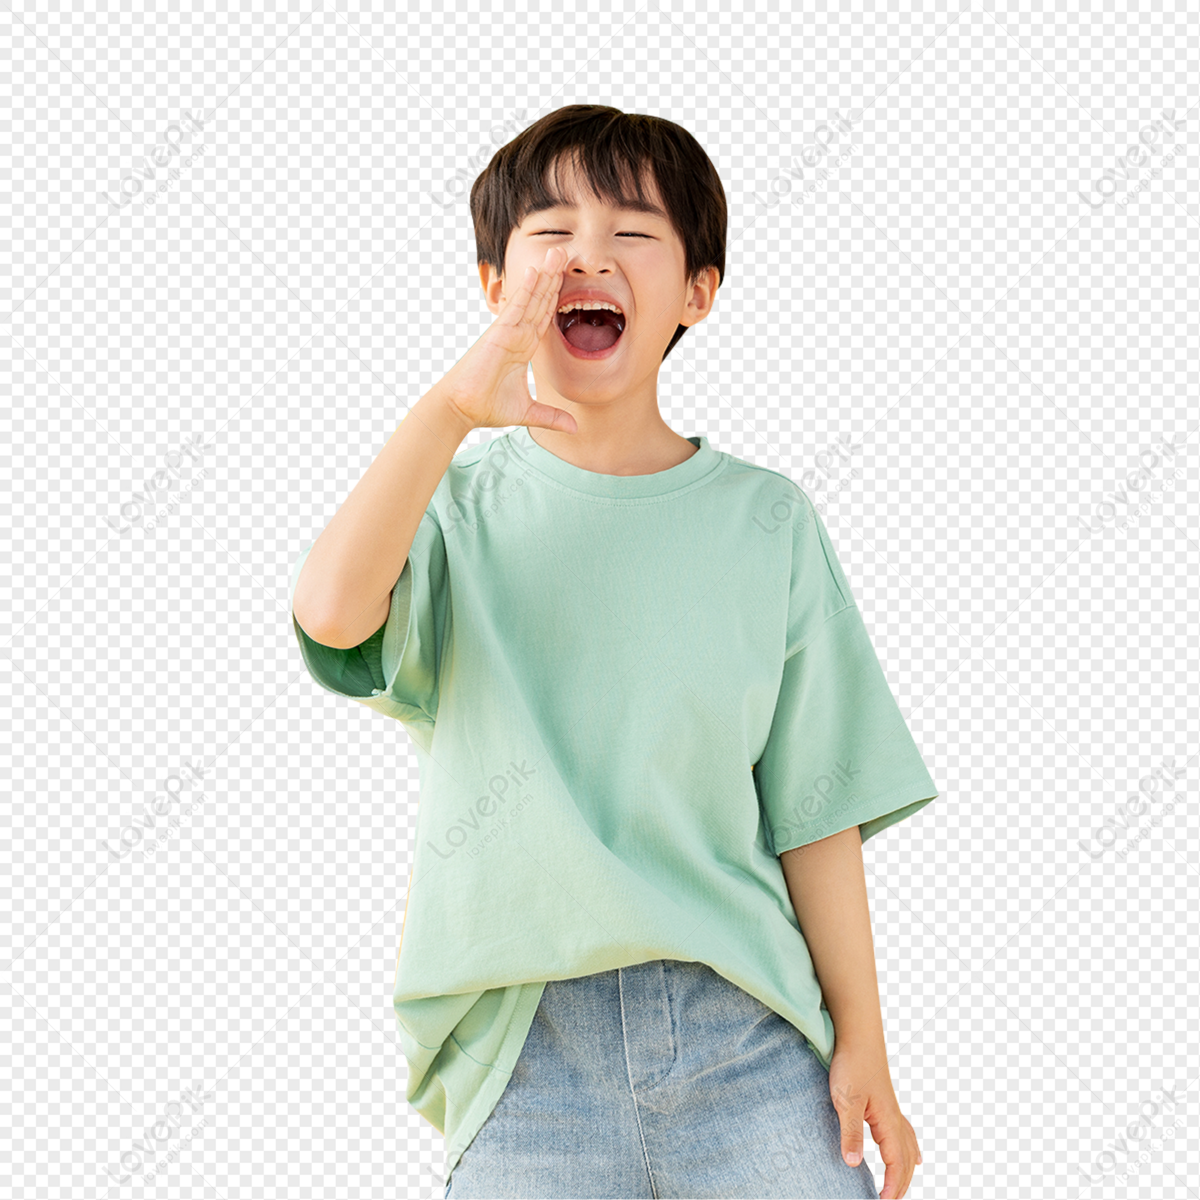 Funny Image Of Little Boy On Childrens Day PNG Free Download And Clipart  Image For Free Download - Lovepik | 401737683